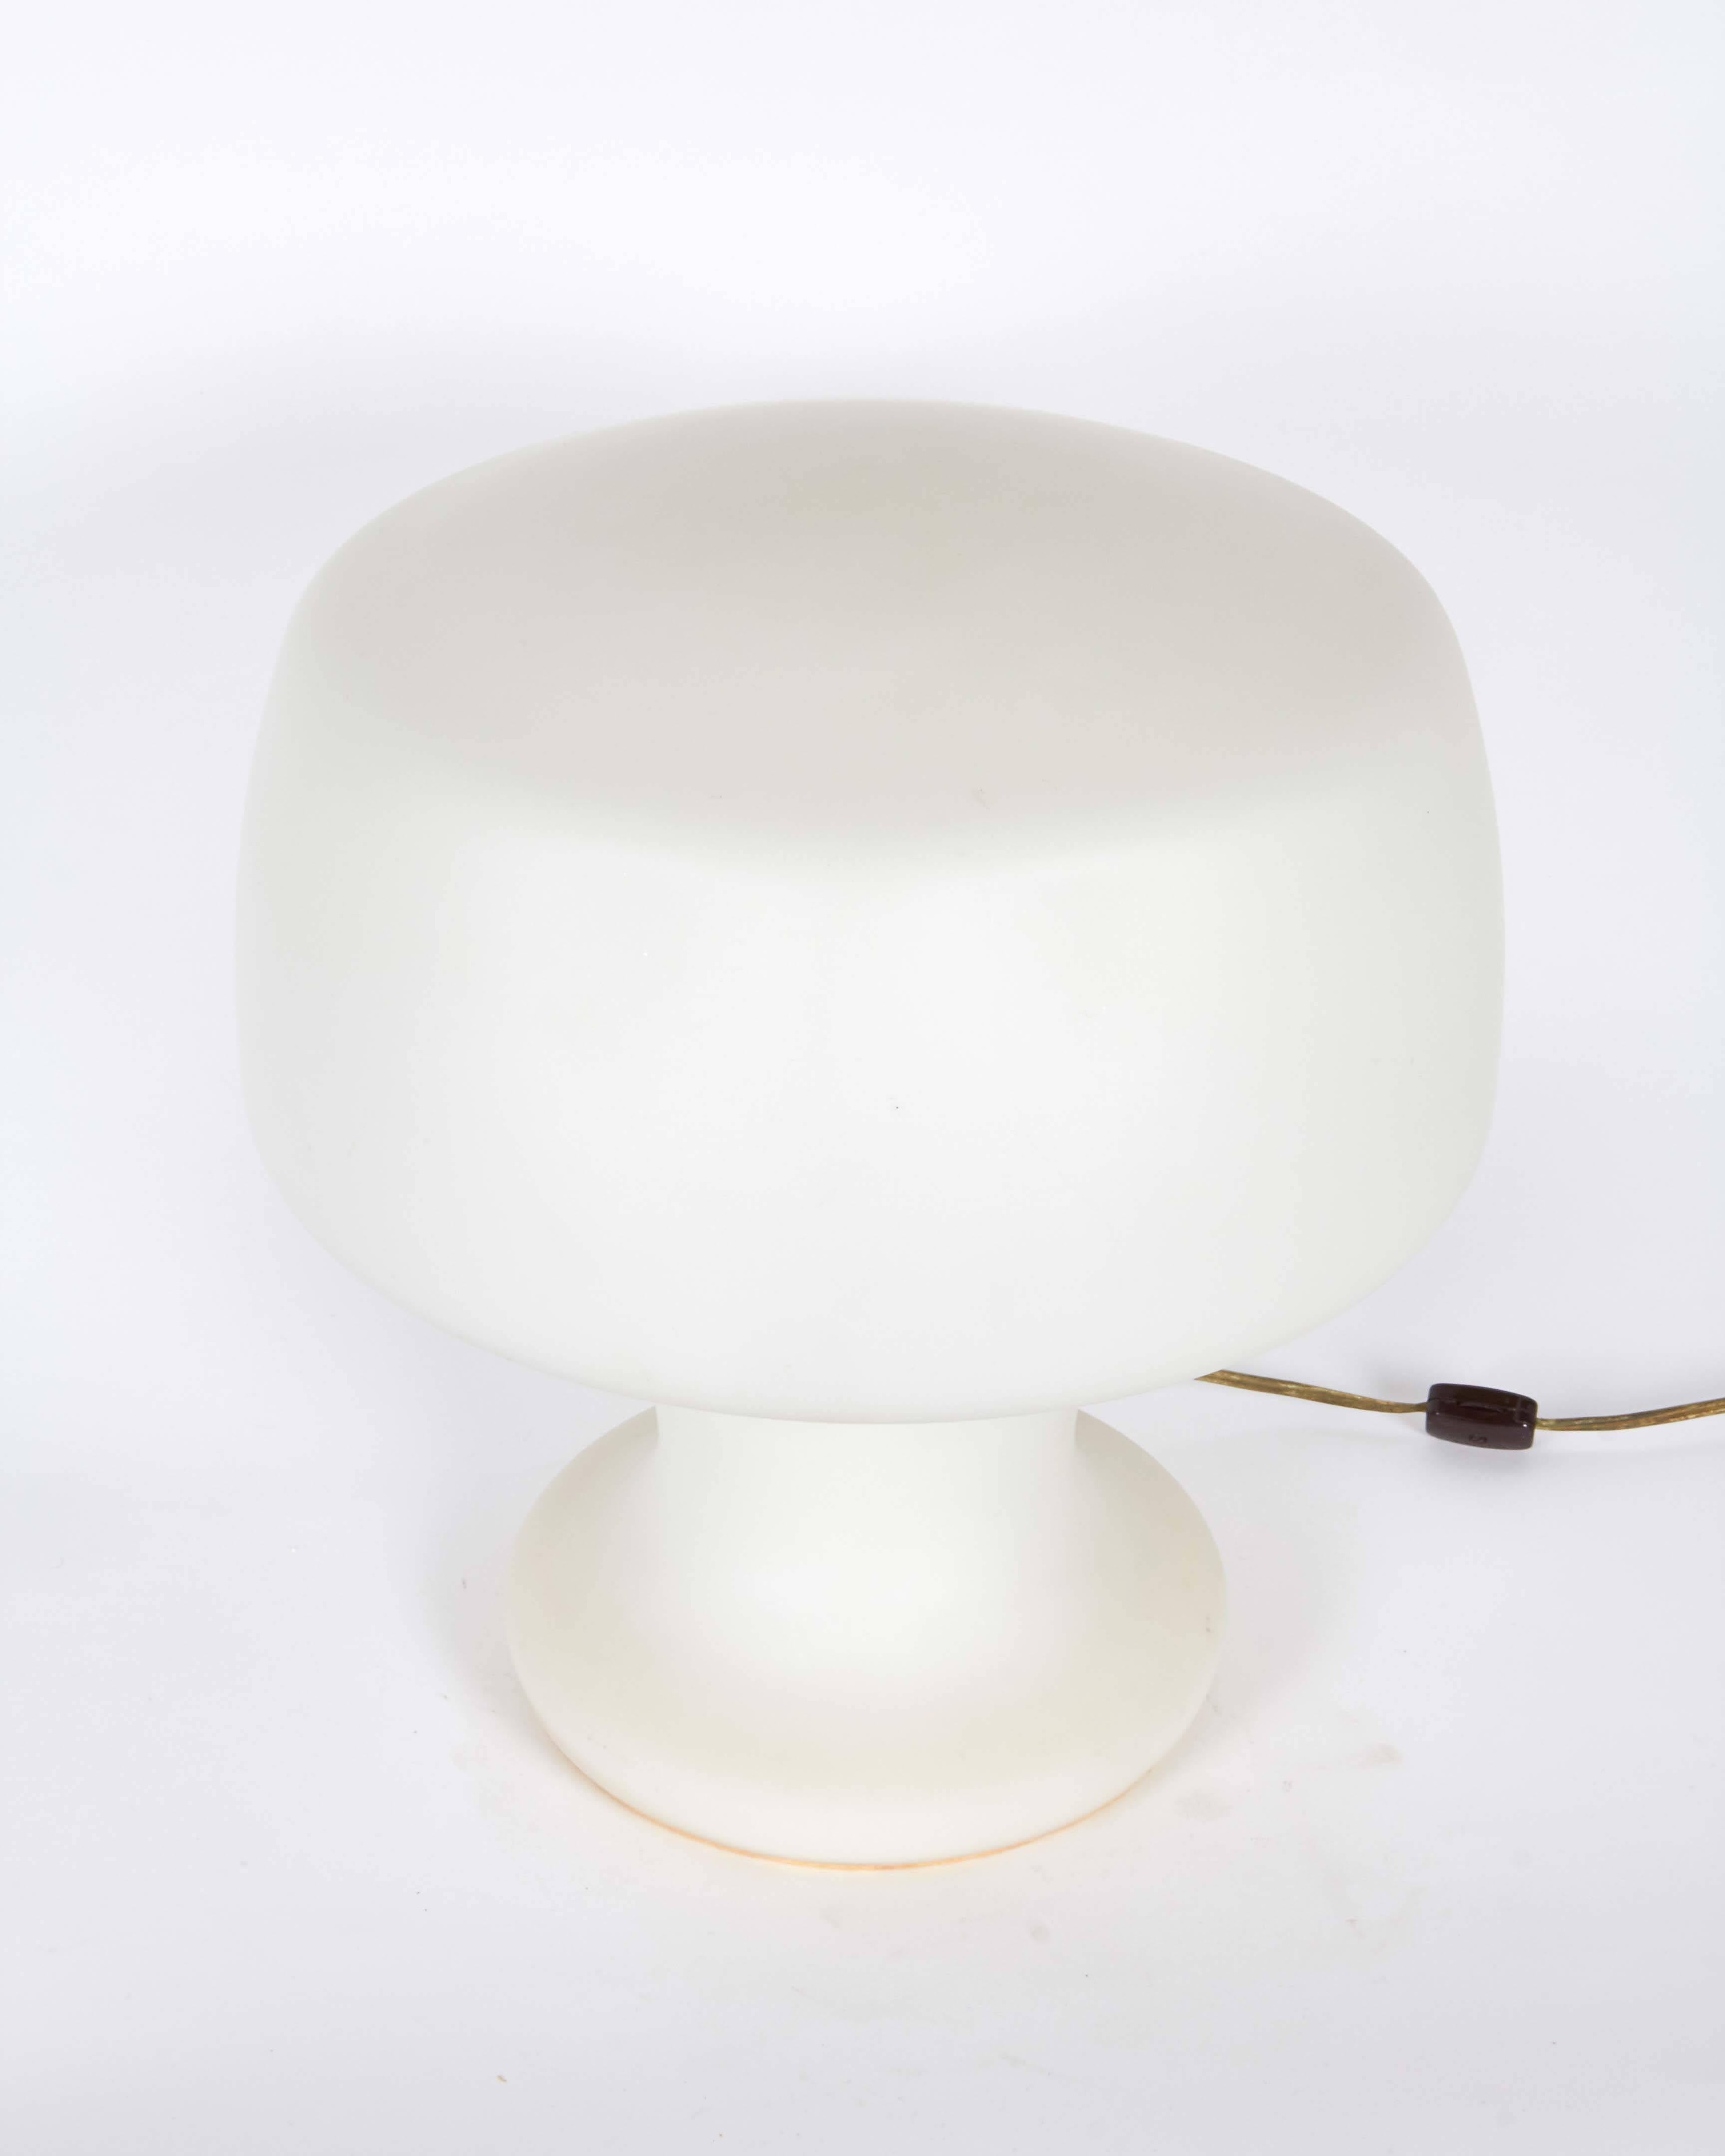 A chic mushroom form table lamp by the Laurel Lamp Company, comprised of frosted glass, manufactured in Italy, circa 1960s, surrounding a single socket. Very good vintage condition, wear consistent with age and use.

10370